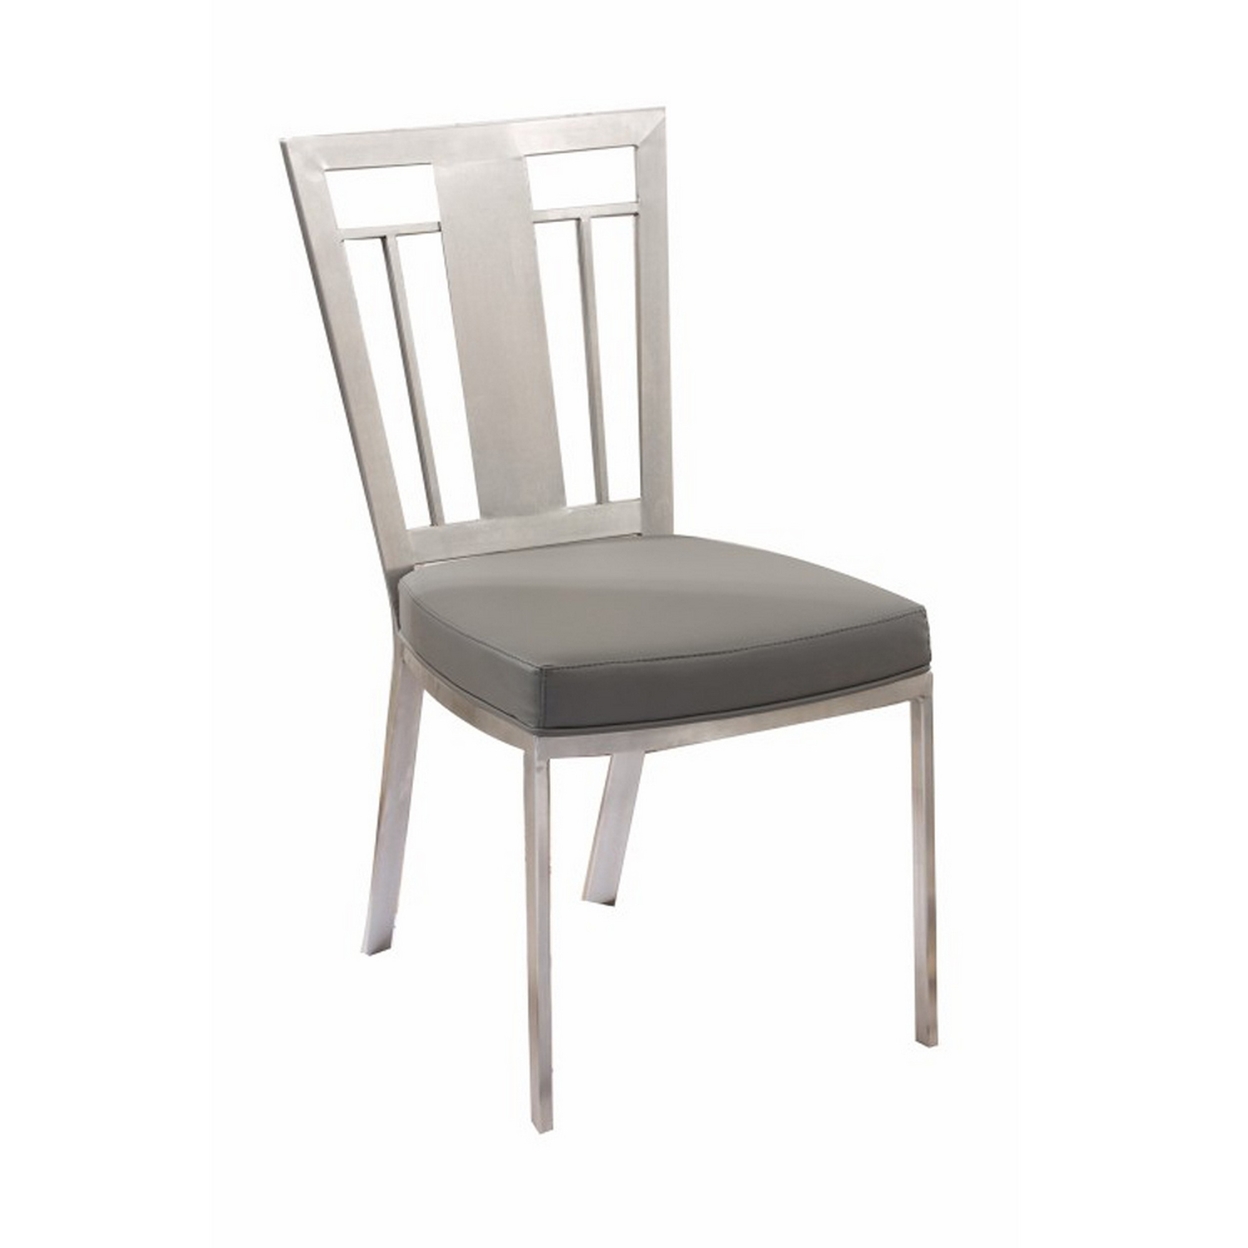 Metal Dining Chair With Leatherette Seat, Set Of 2, Gray And Silver- Saltoro Sherpi